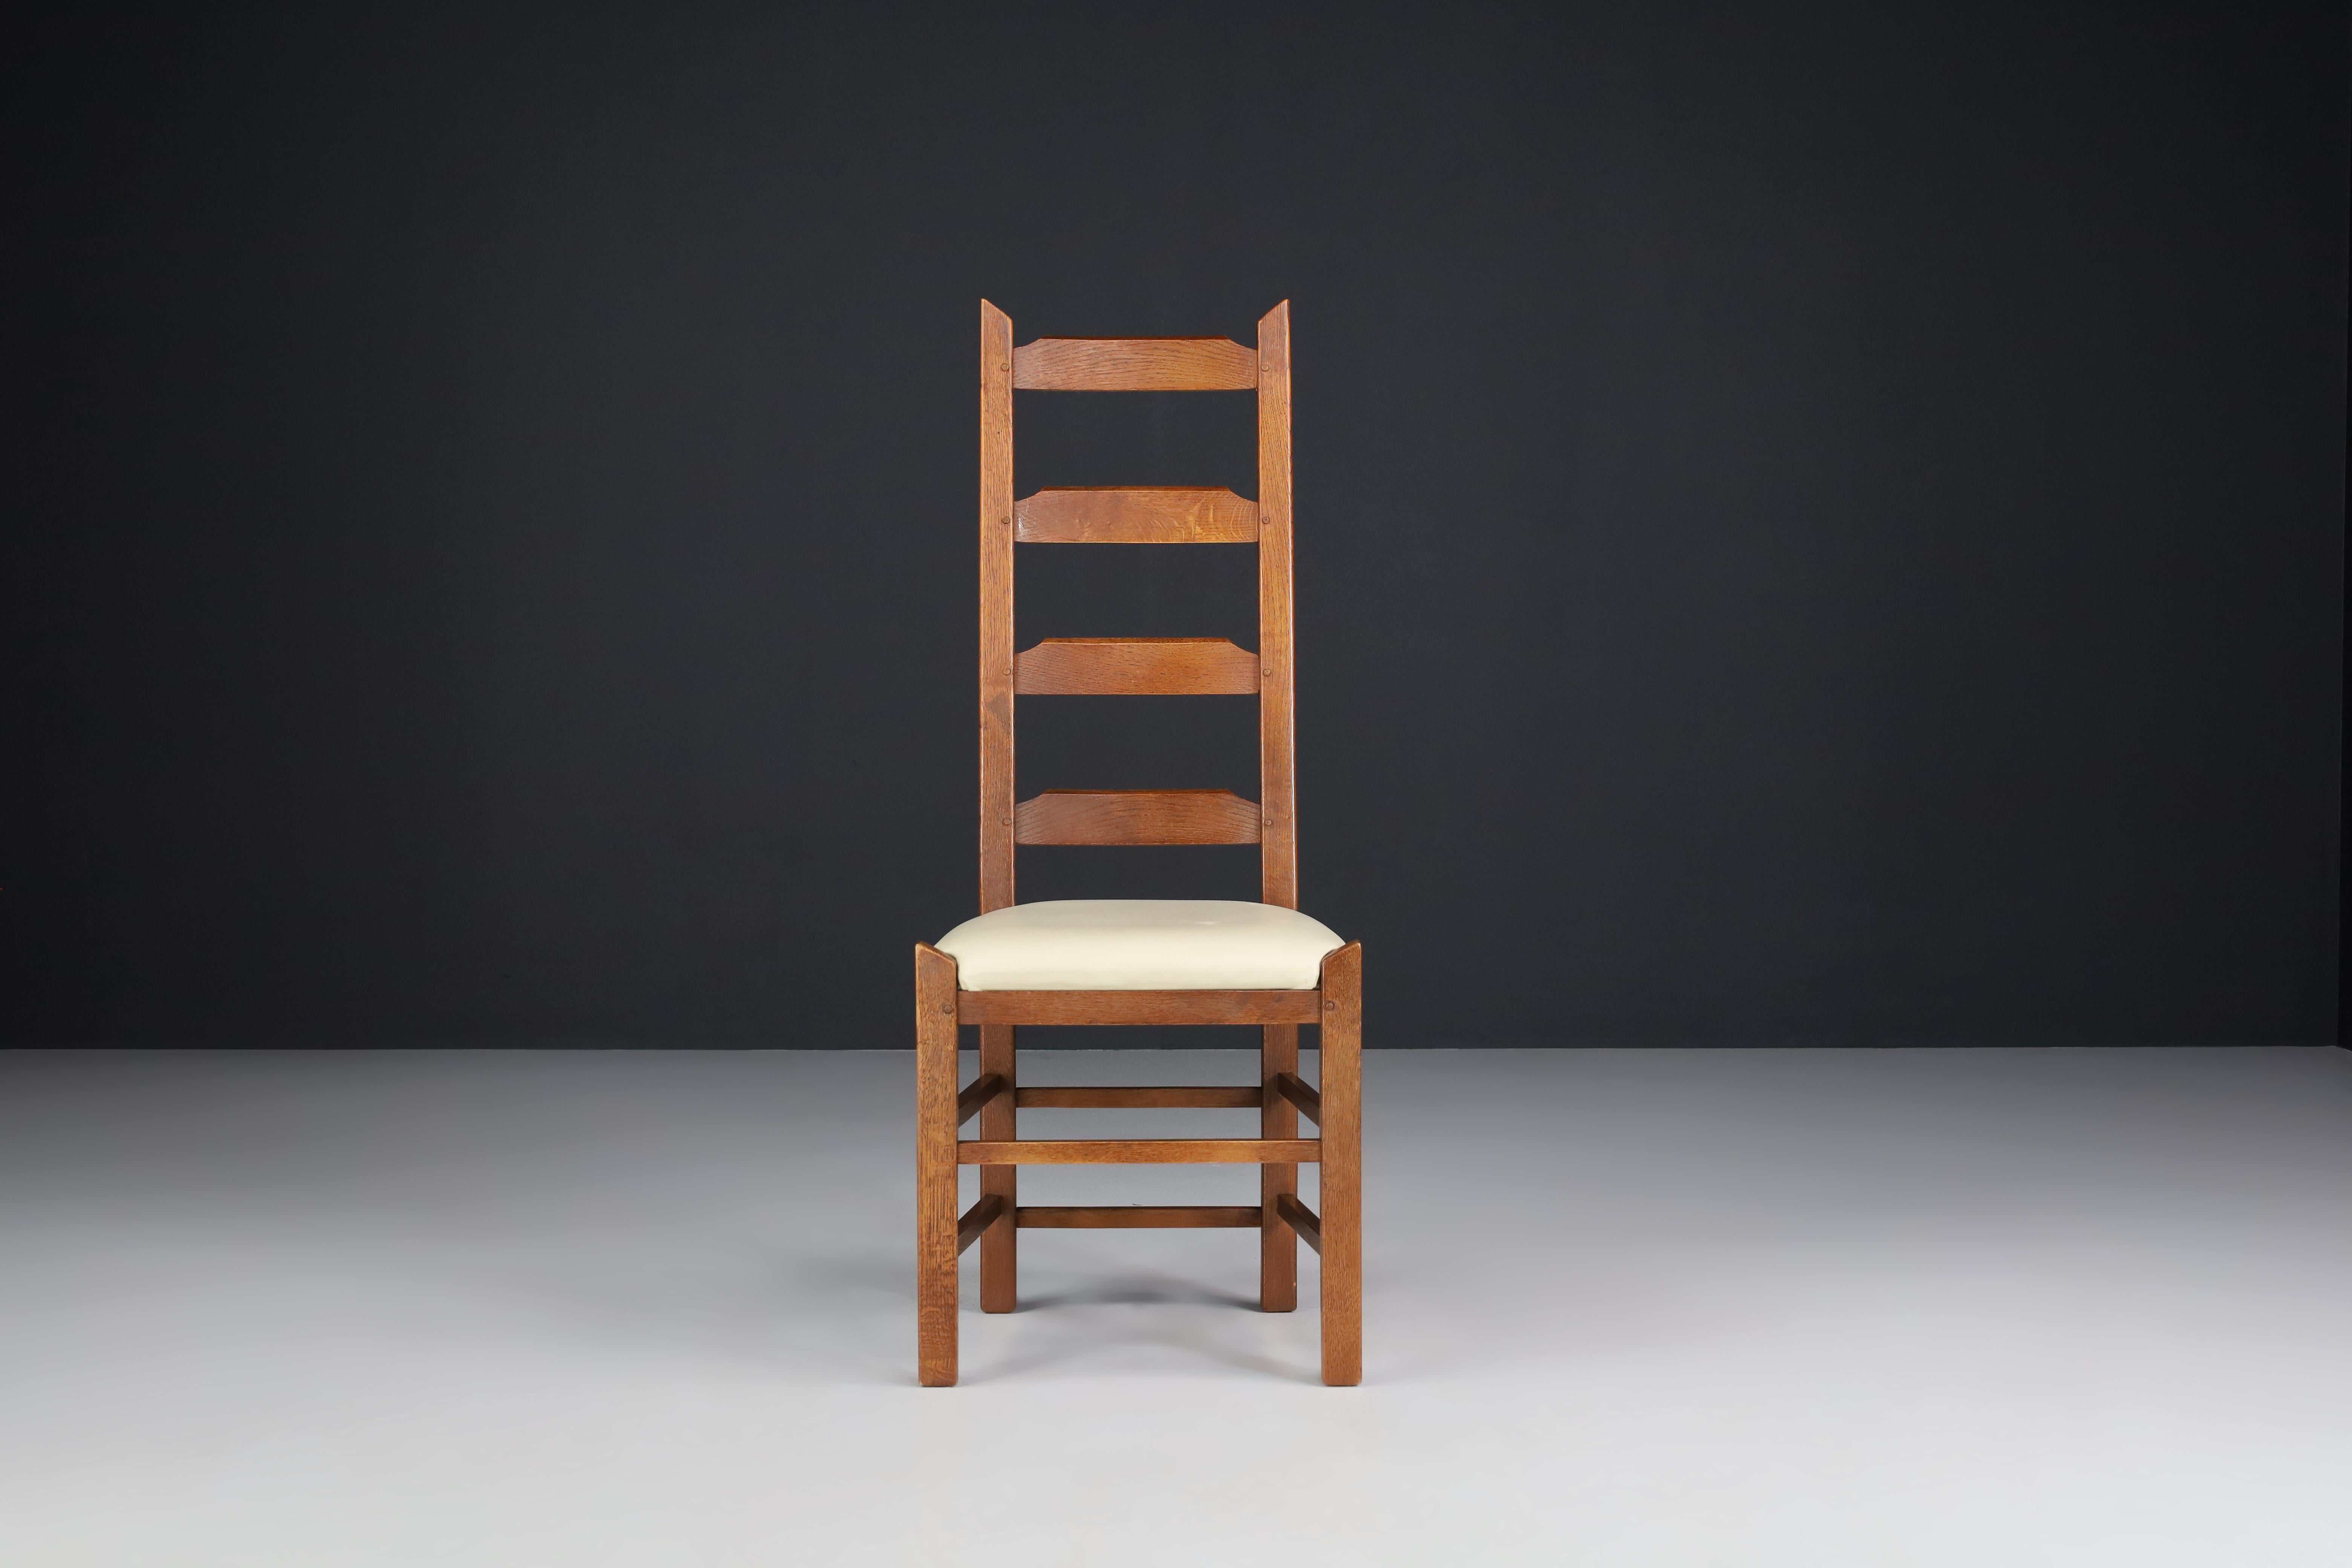 20th Century Ladder Back Chairs Crafted in Oak and Leather Seats, France, 1950s For Sale